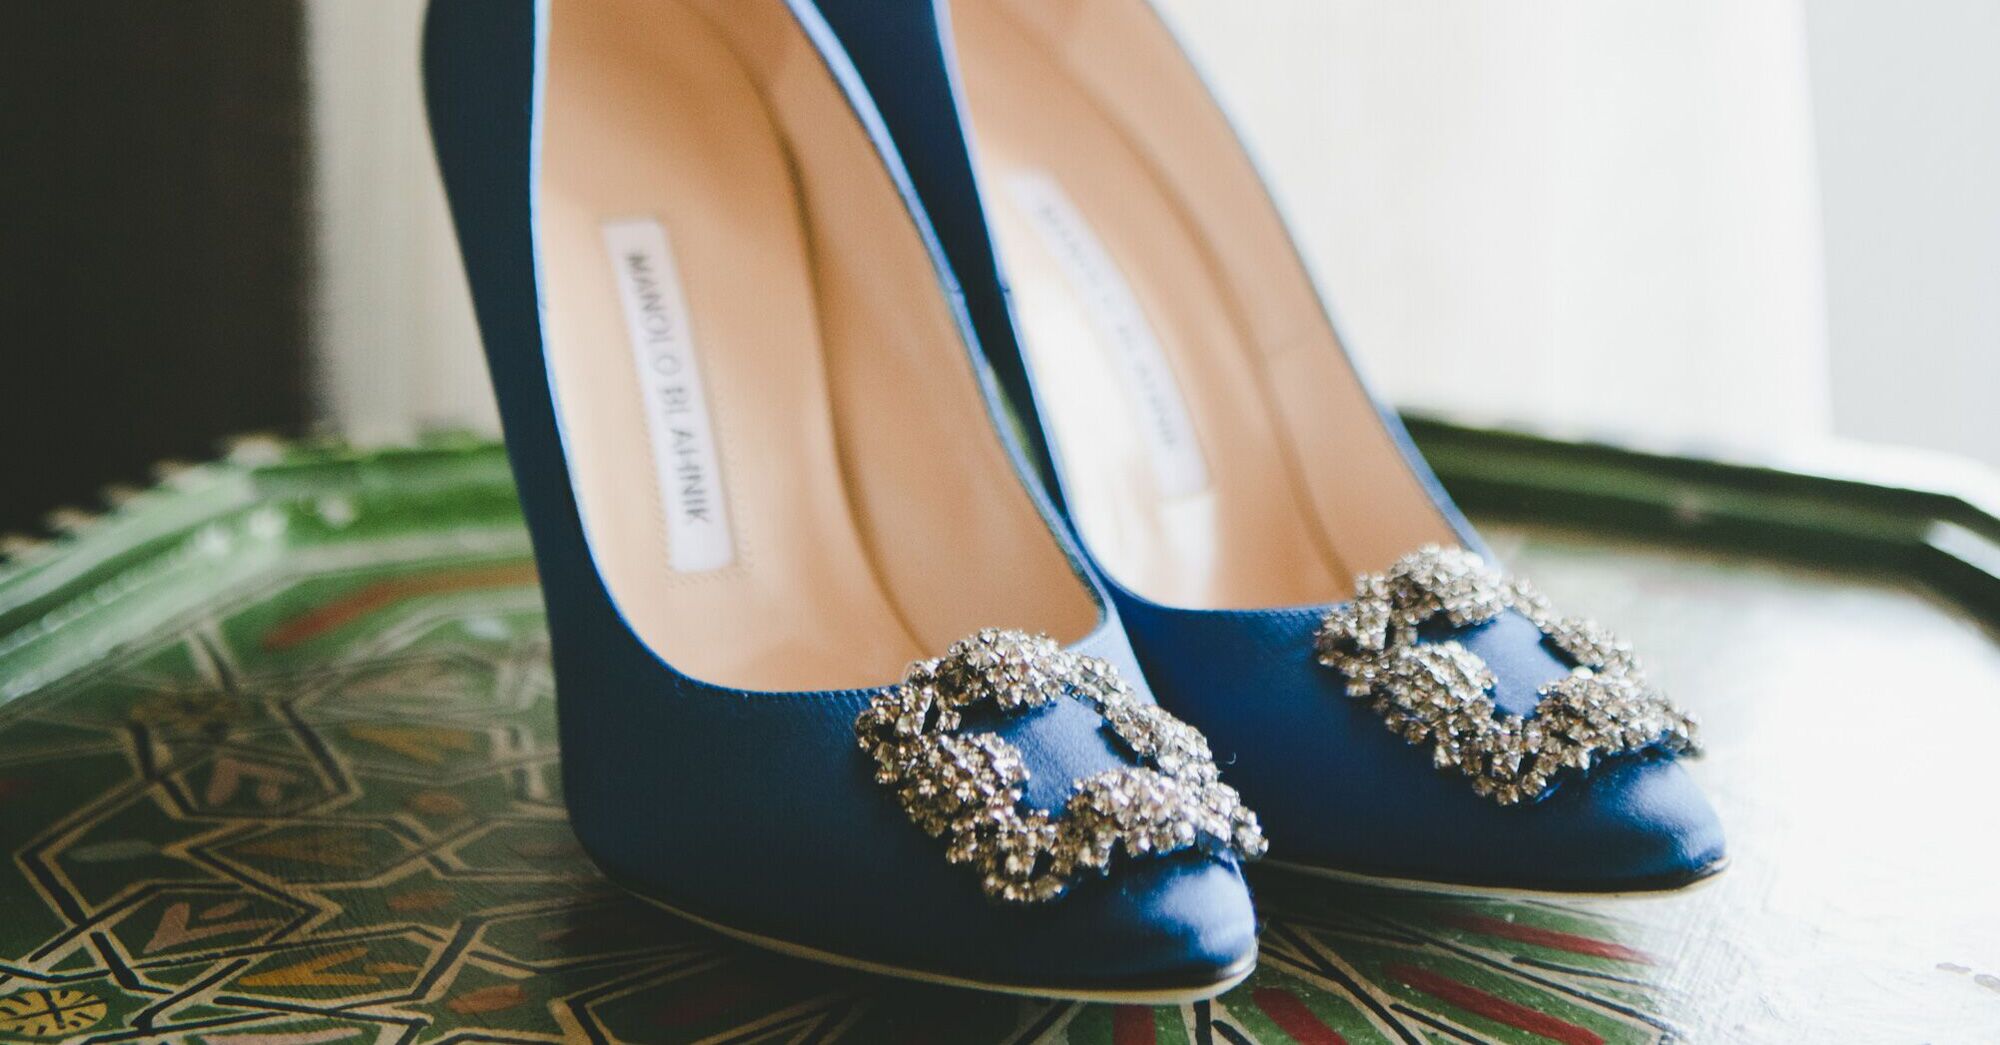 Blue Gold French Silk Pointy toe Pump High Heel Shoe with Bow and Rhinestones 